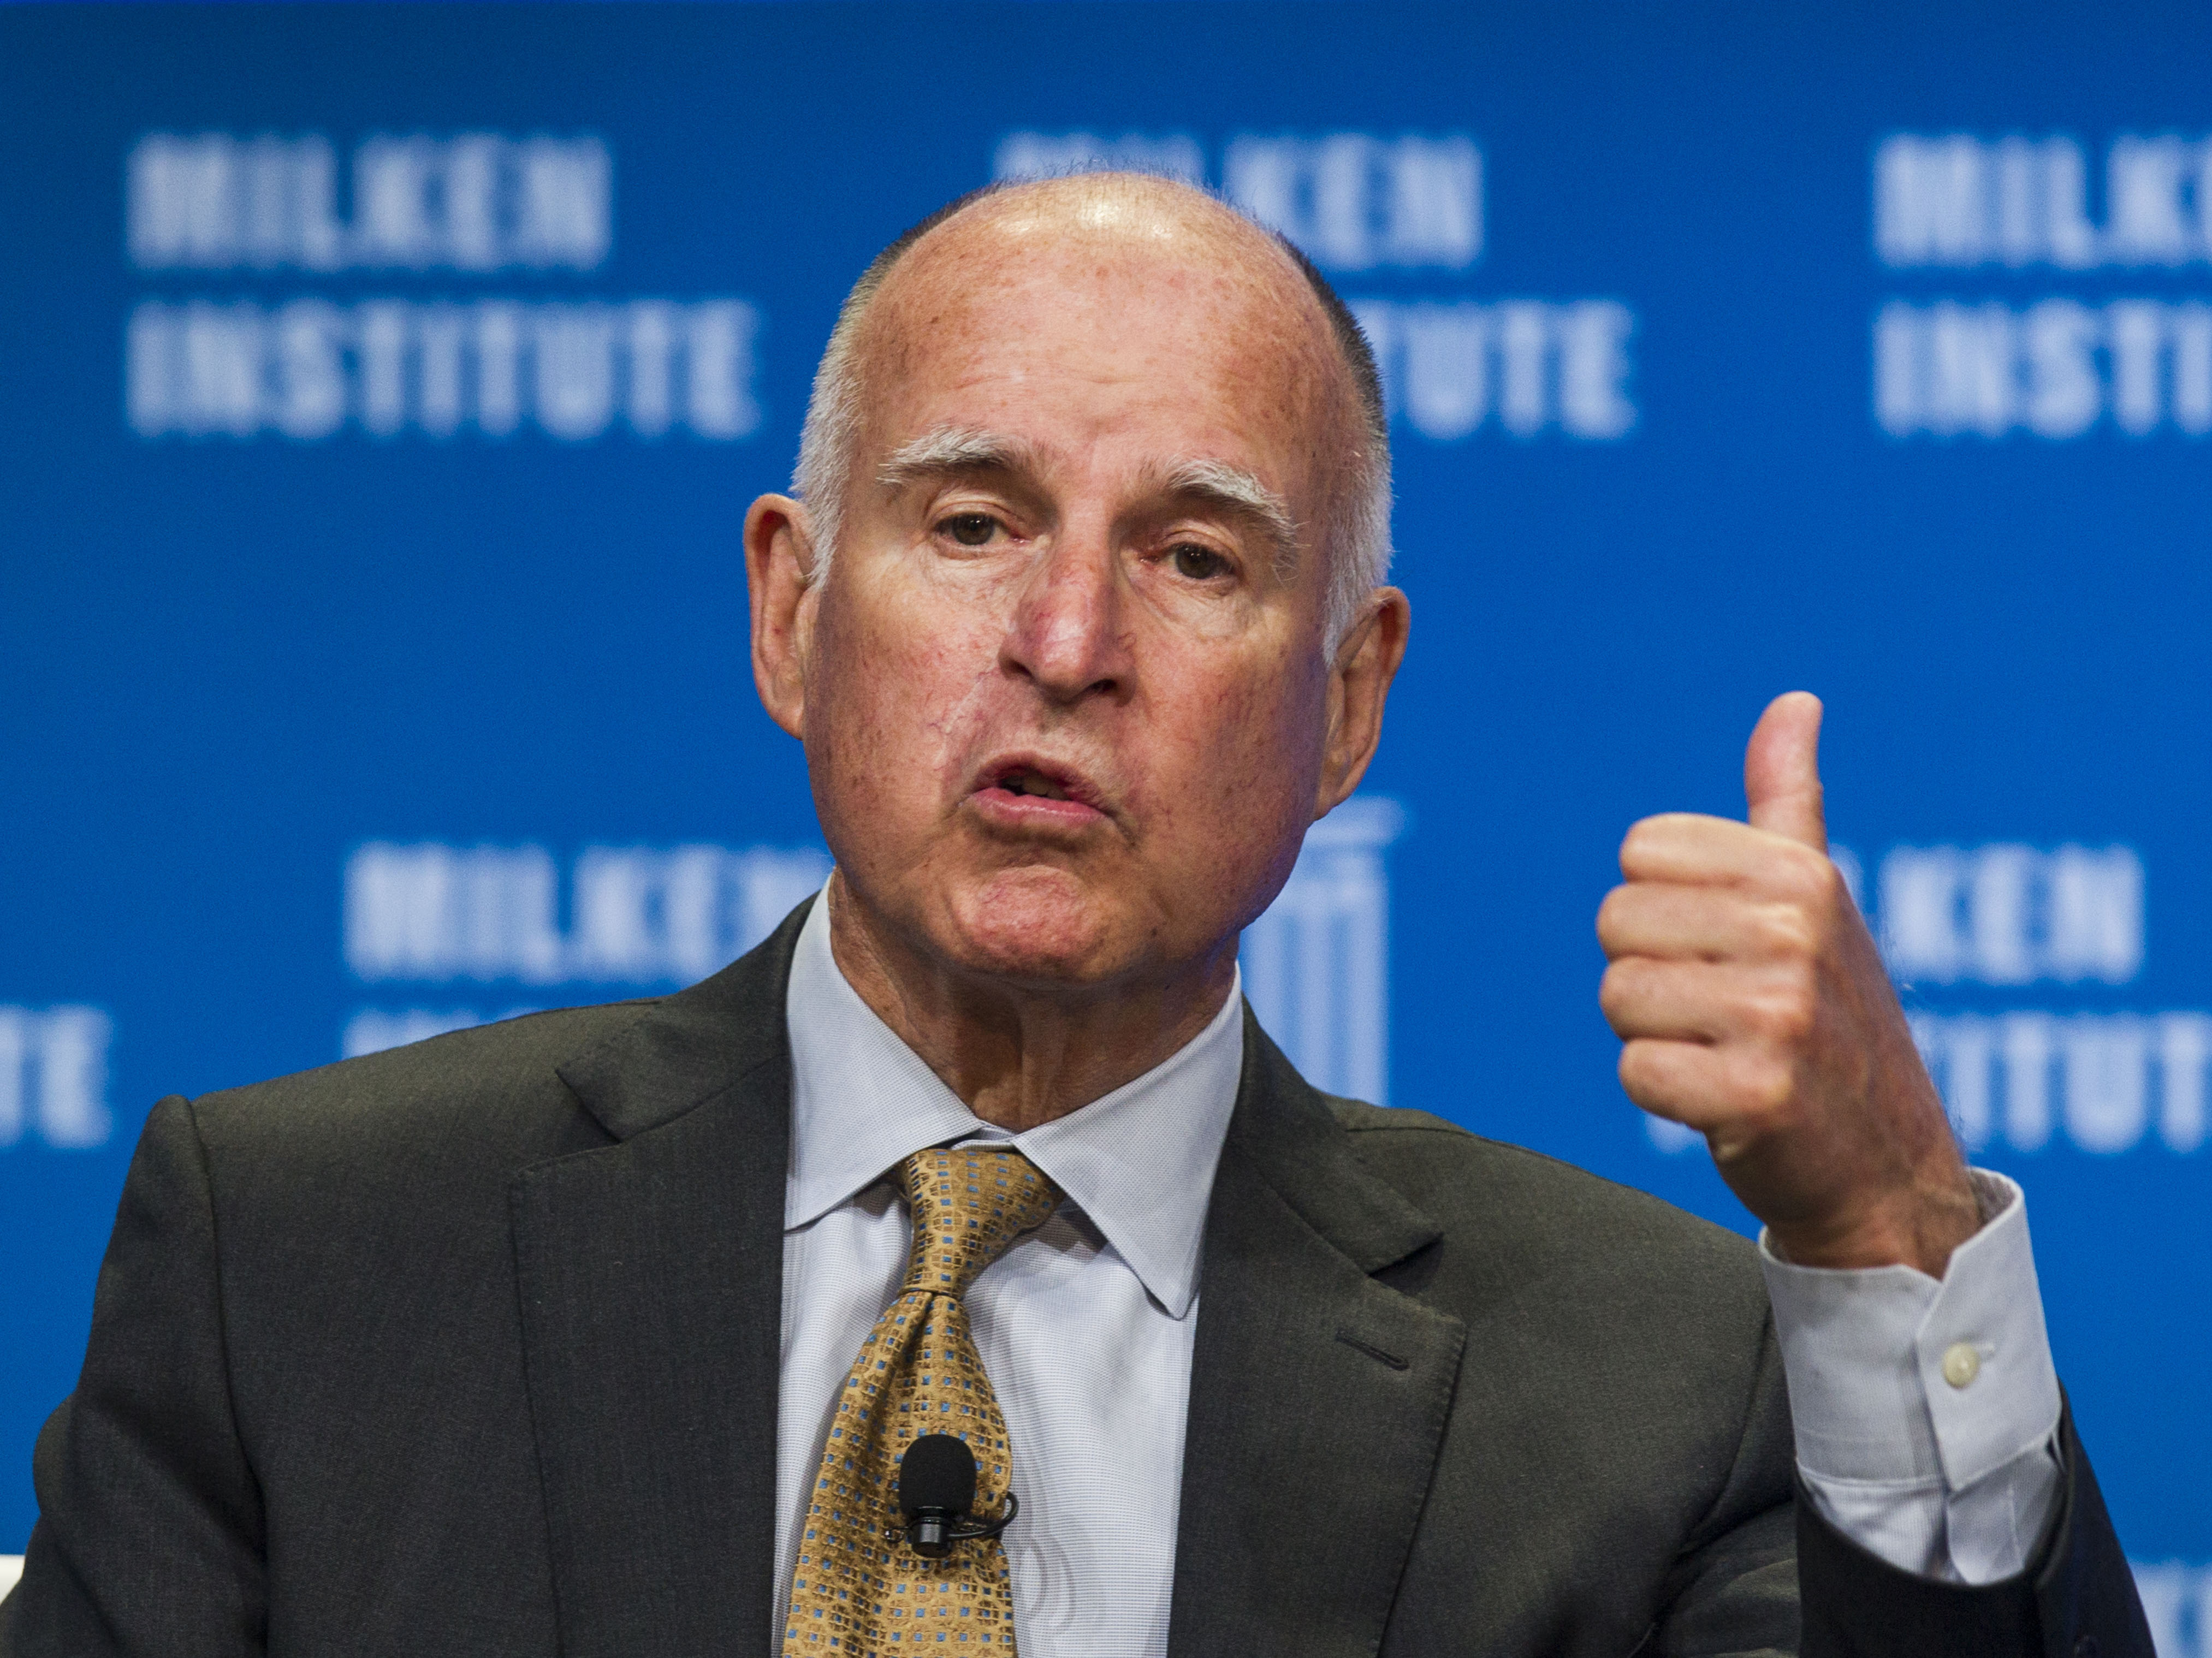 California Gov. Jerry Brown signed into law the states so-called "motor voter" law in hopes of boosting turnout in future elections. The state had 42 percent turnout in the 2014 midterms, a record low. (Photo by Ringo H.W. Chiu/AP)